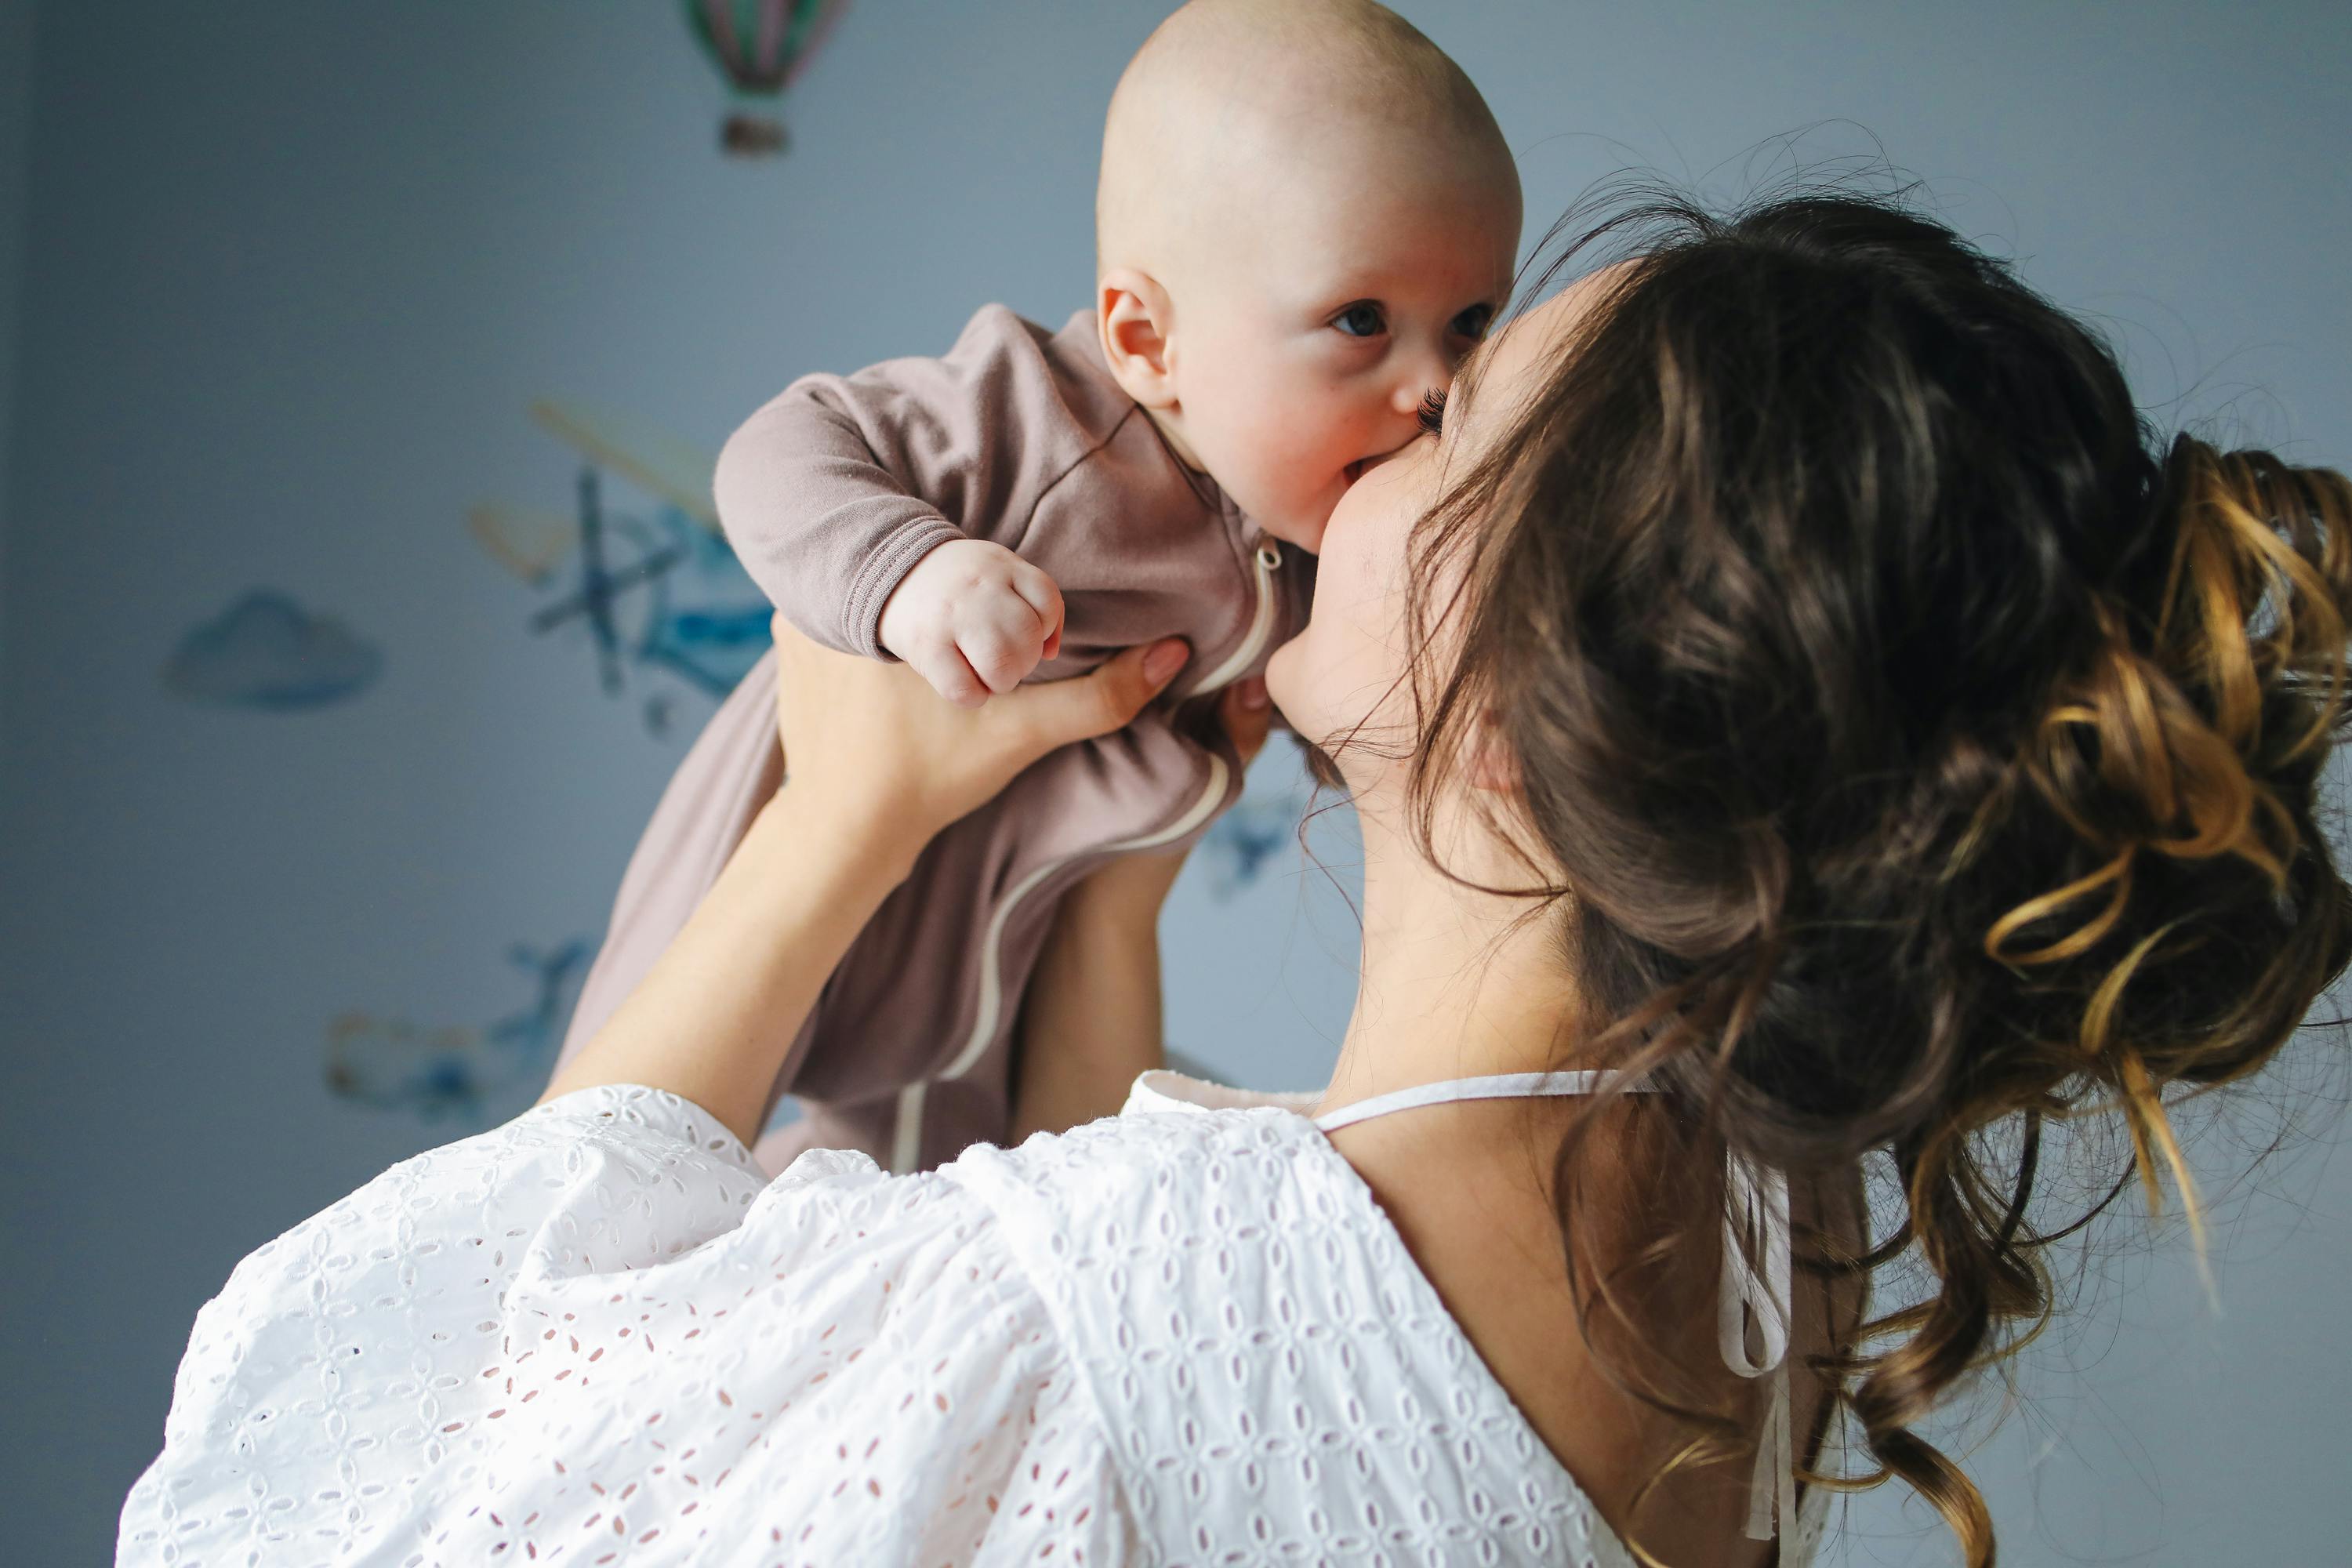 A mam and her baby | Source: Pexels